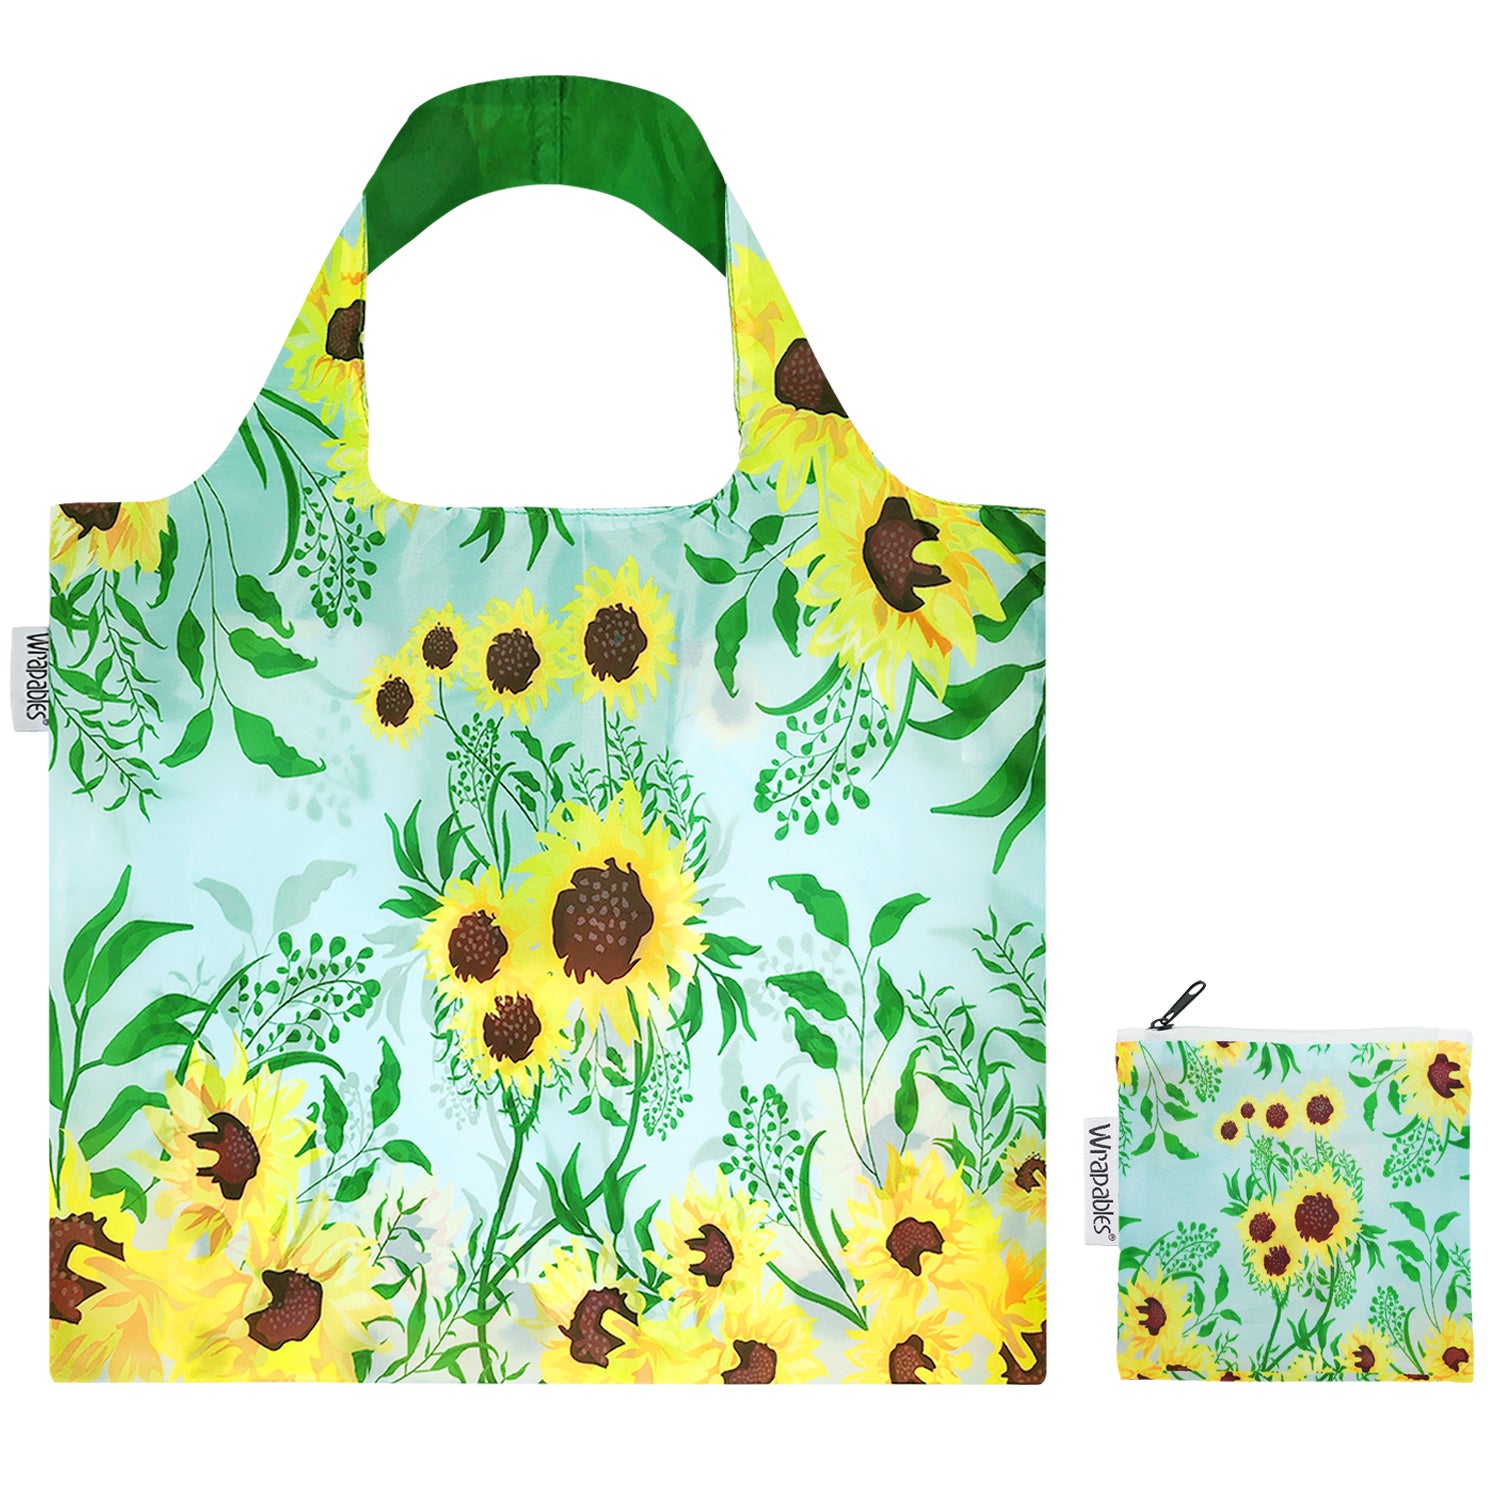 Wrapables Large Reusable Shopping Tote Bag with Outer Pouch (Set of 3)